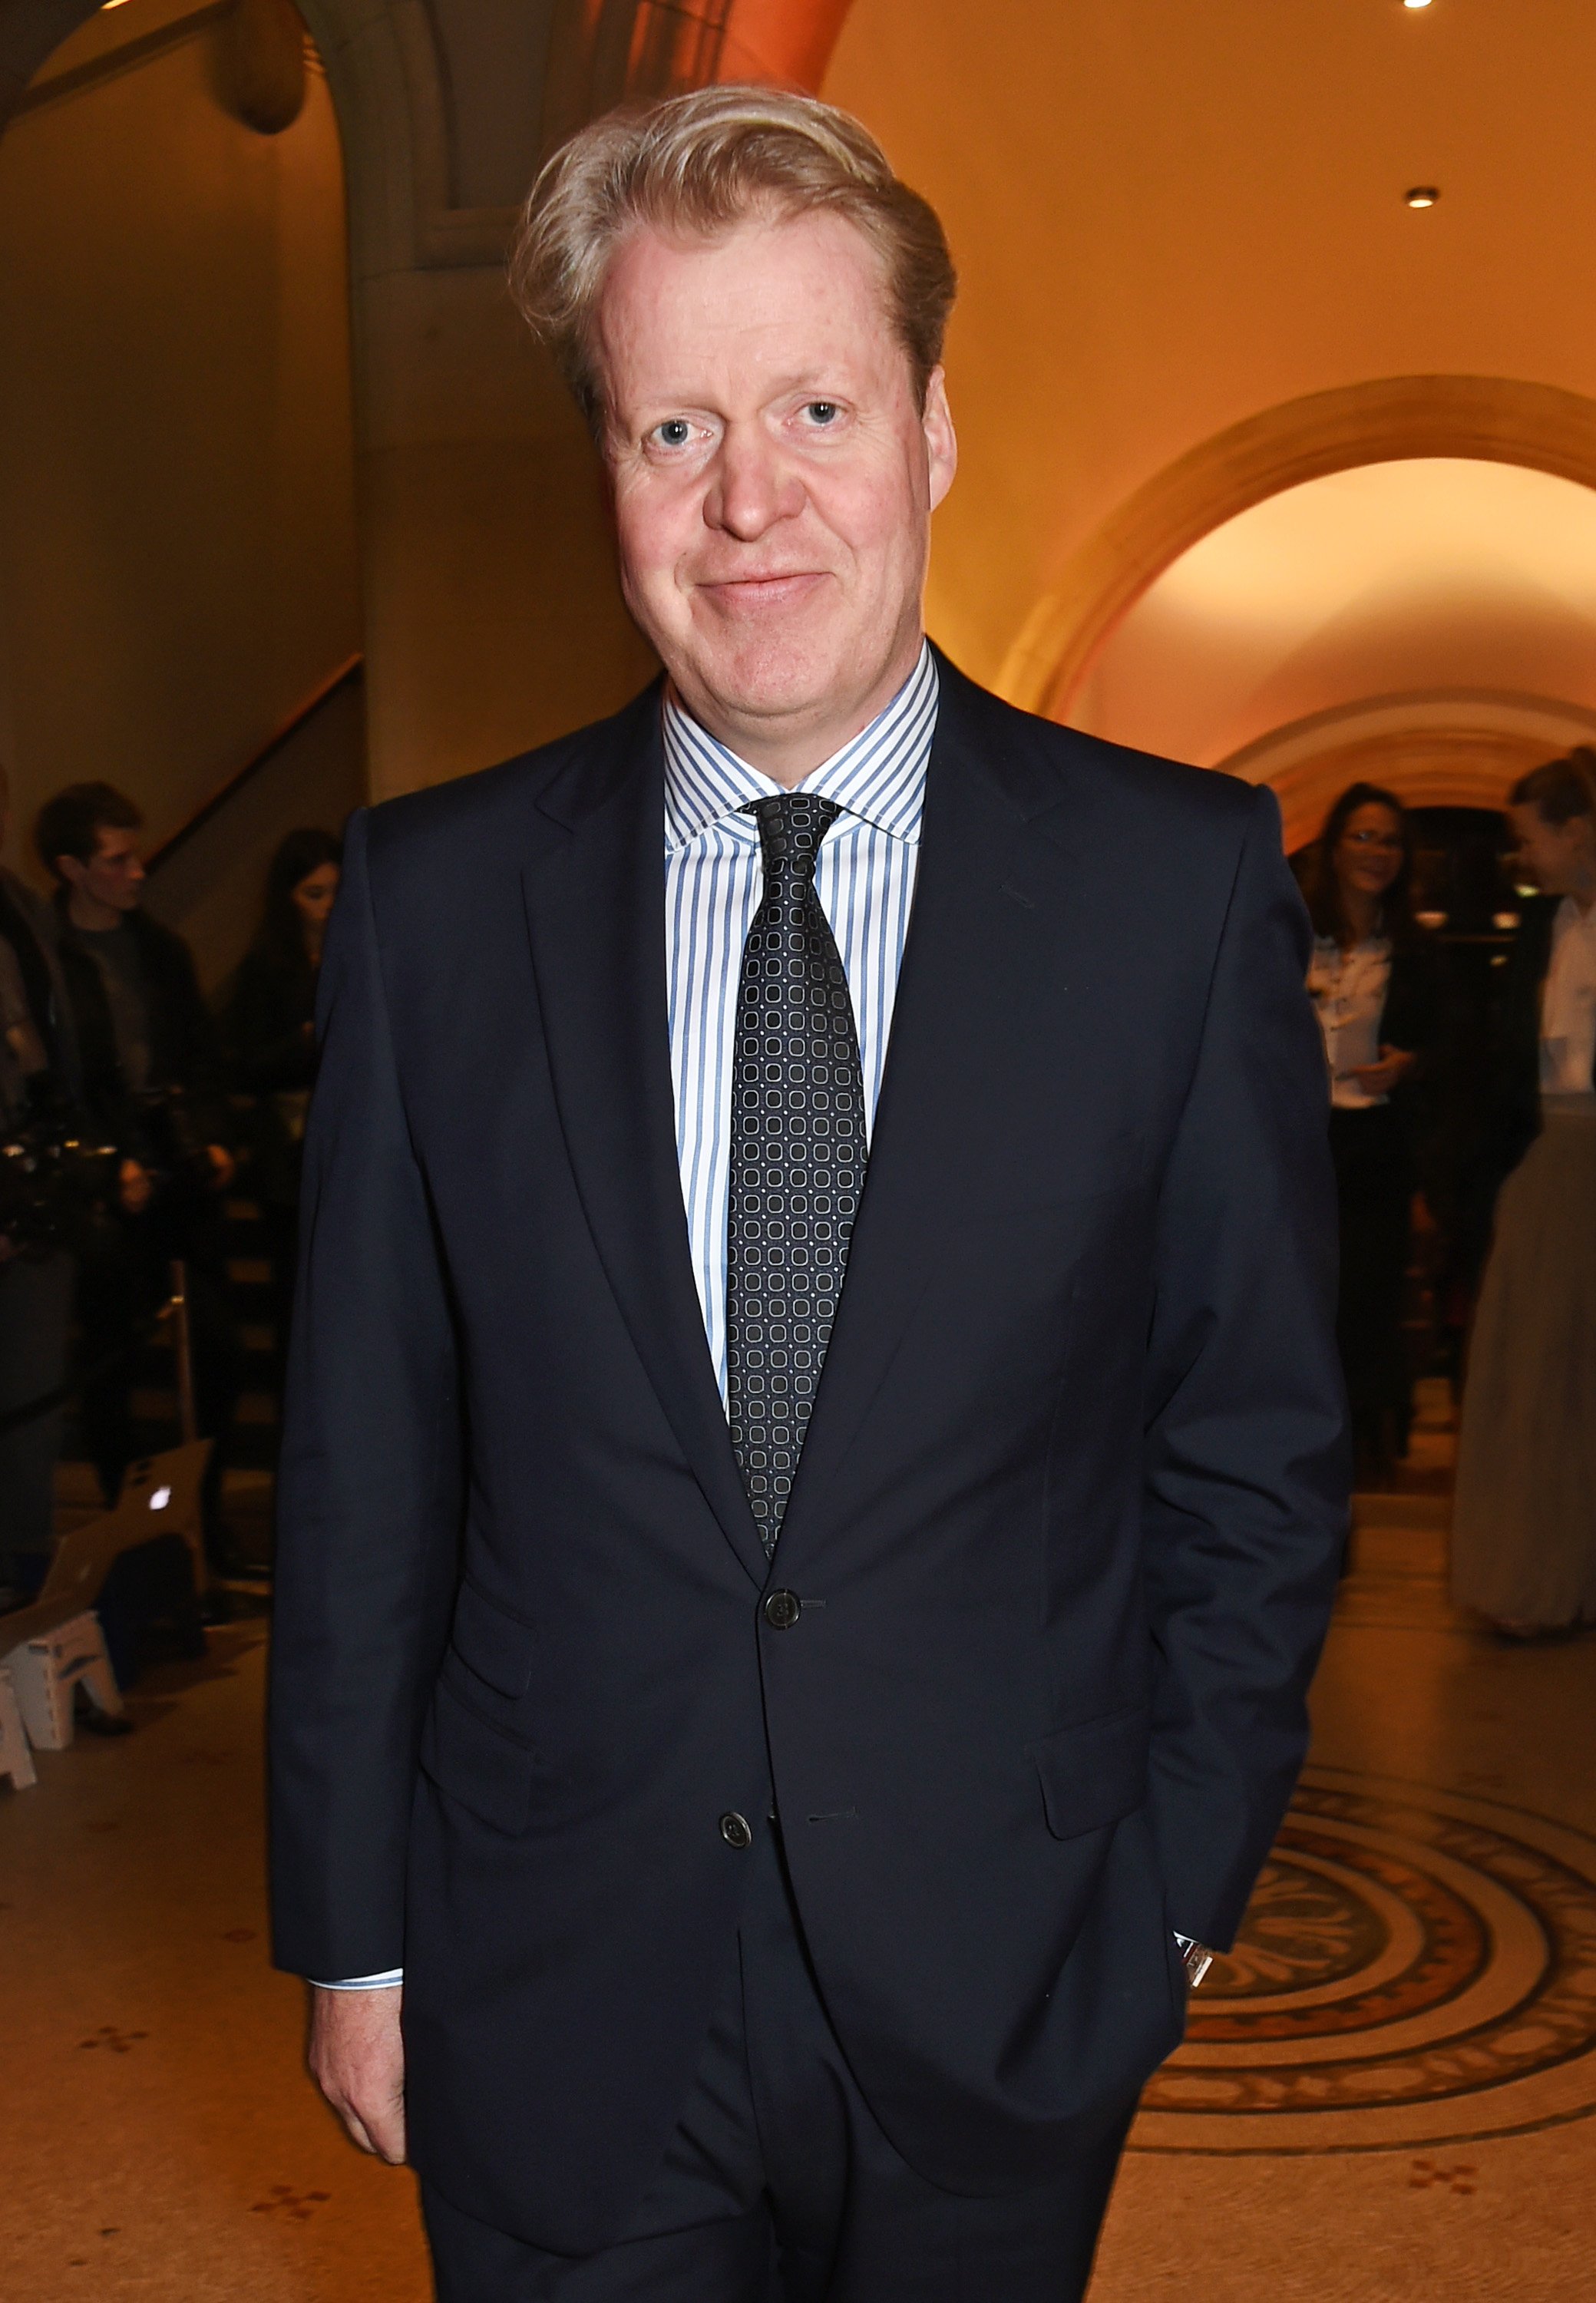 Earl Charles Spencer at the opening of "Vogue 100: A Century of Style" February 9, 2016 |  Source: Getty Images